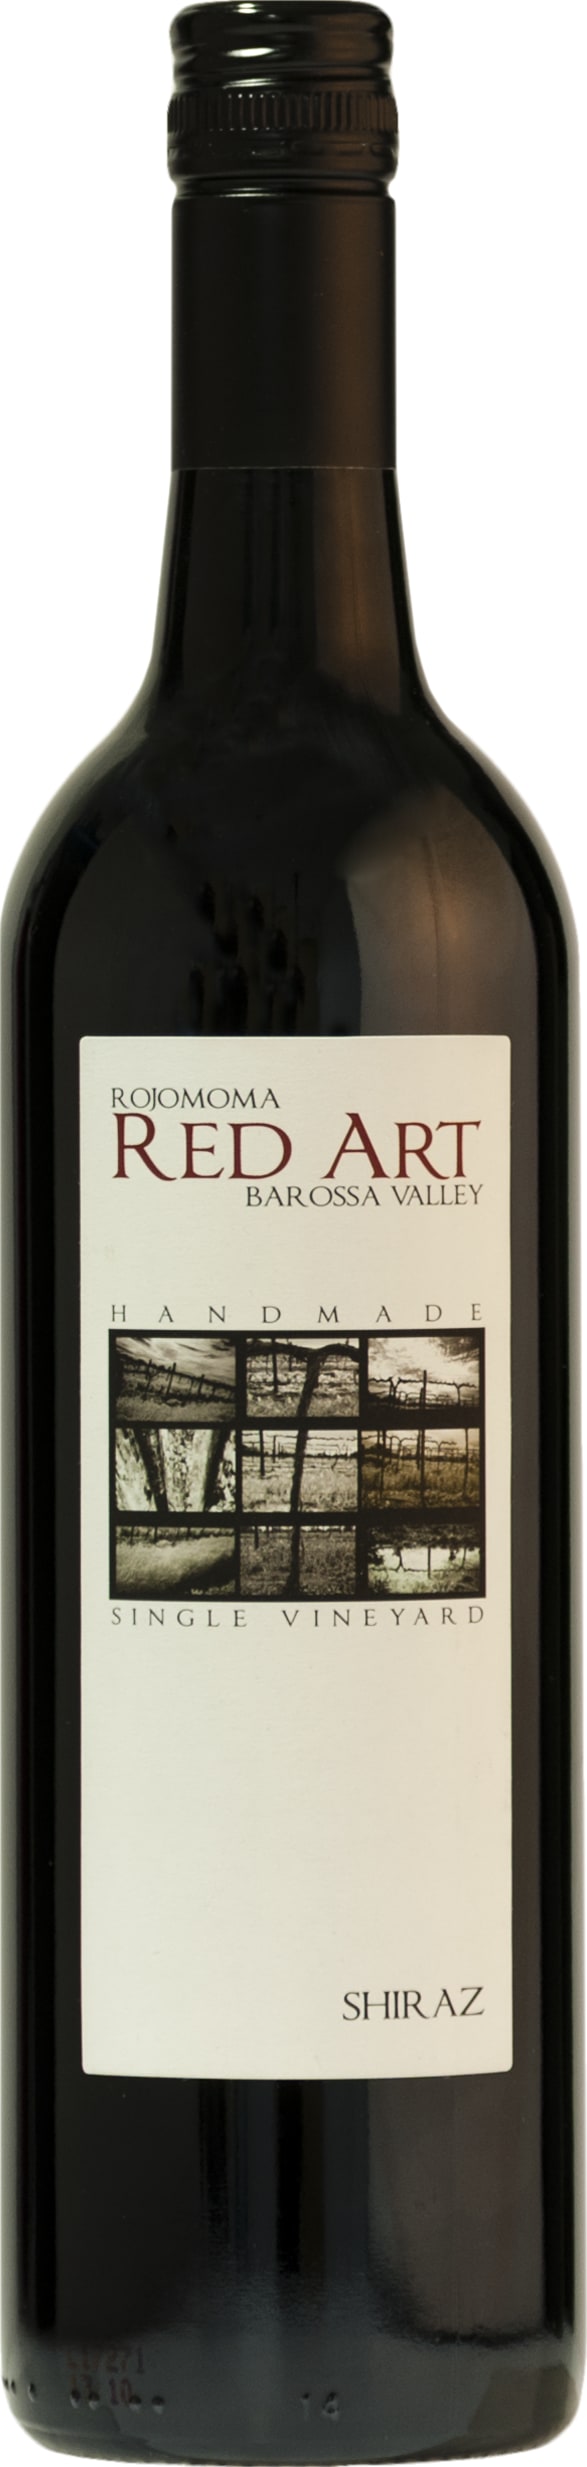 Rojomoma Red Art Shiraz 2016 75cl - Buy Rojomoma Wines from GREAT WINES DIRECT wine shop